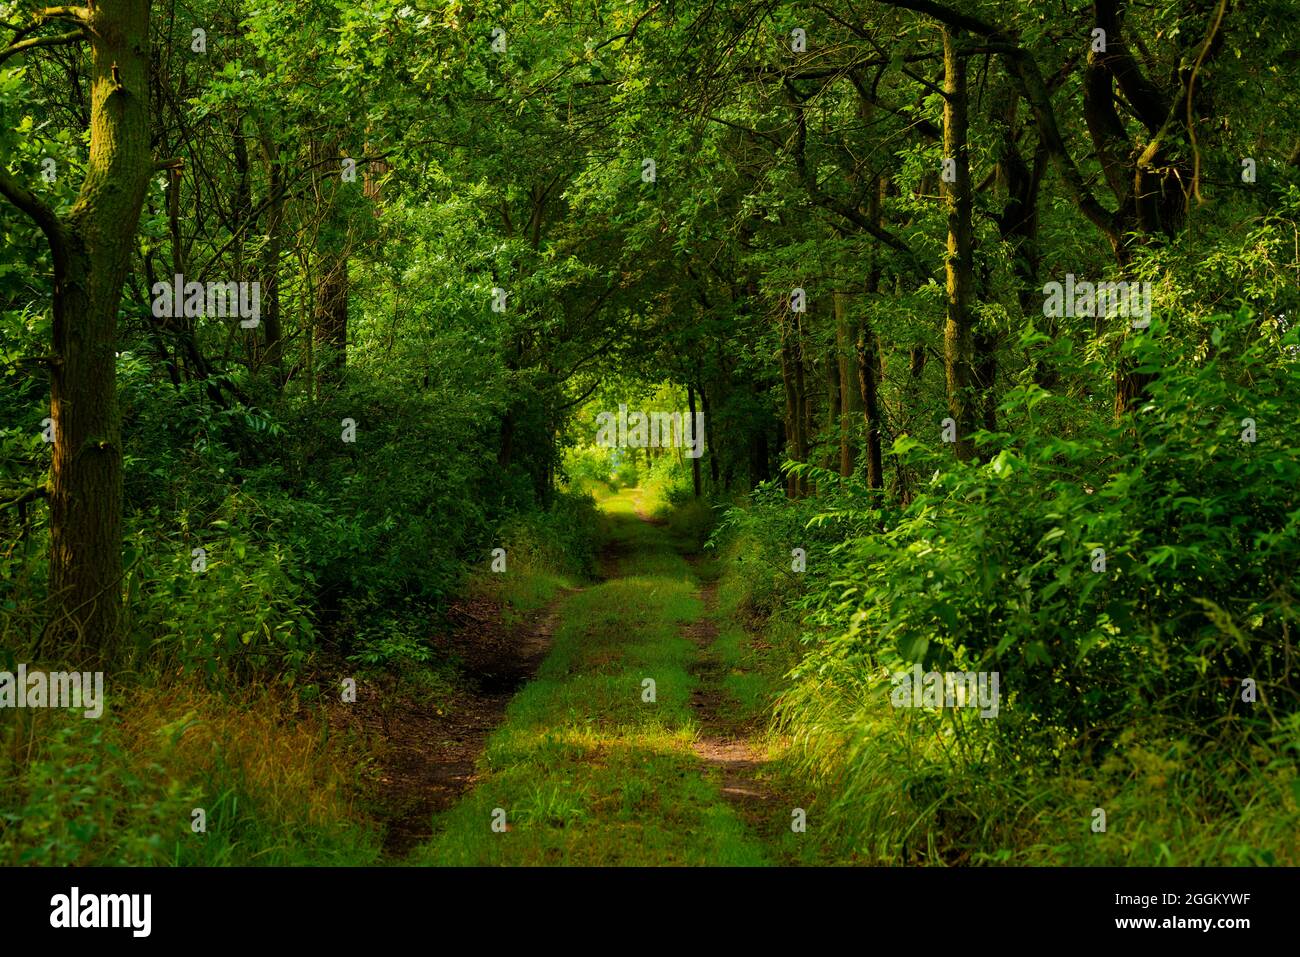 Forest road in the early morning in summer, along the way oak trees and green shrubs Stock Photo